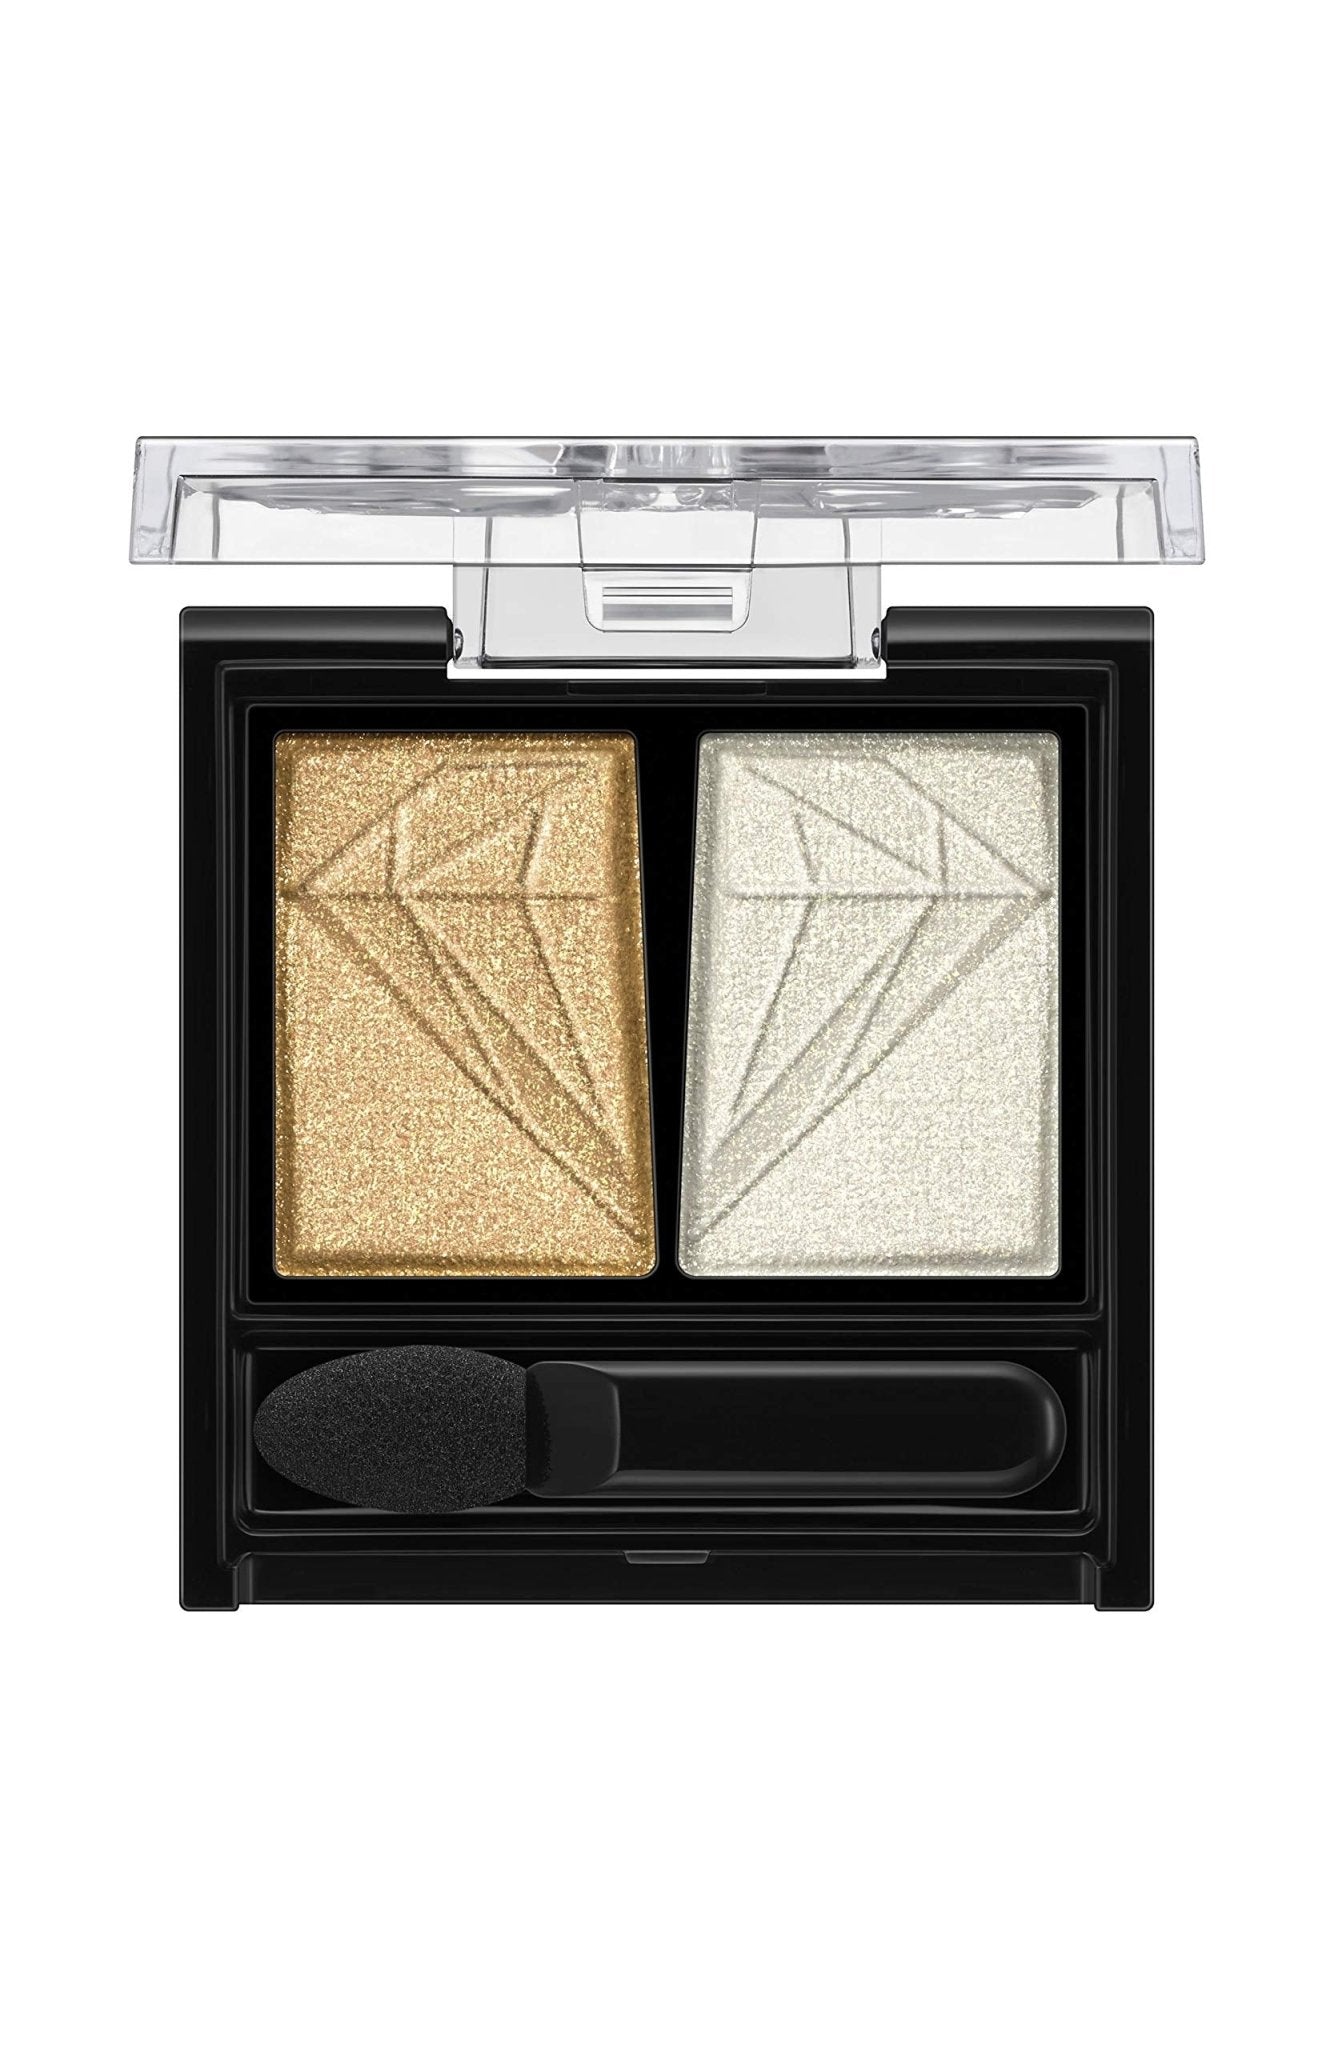 Kate Crush Diamond Eyes GD - 1 Eye Shadow 2.2g - Discontinued Manufacturer Product